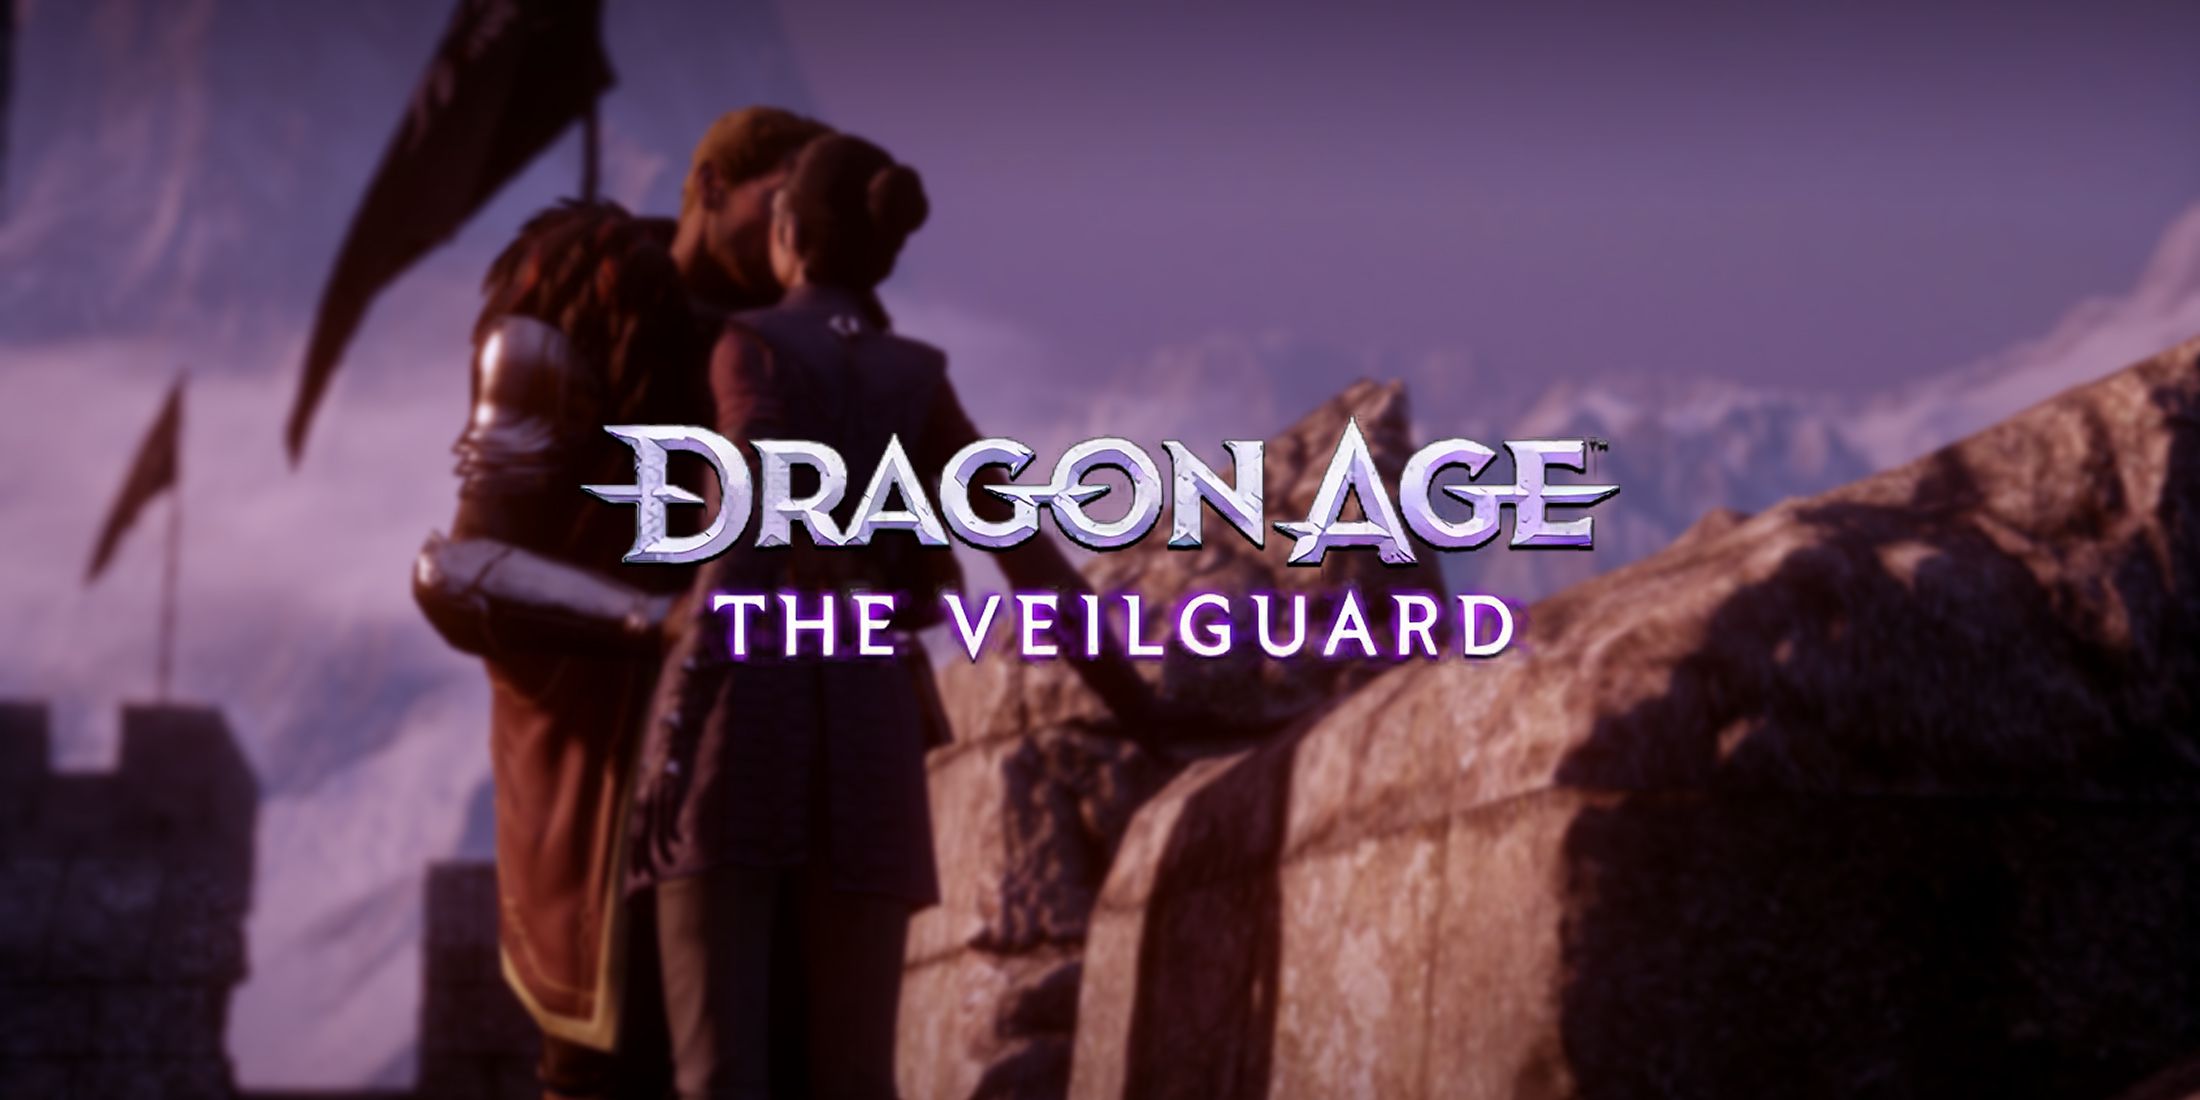 dragon age the veilguard romance options available to all players regardless of gender